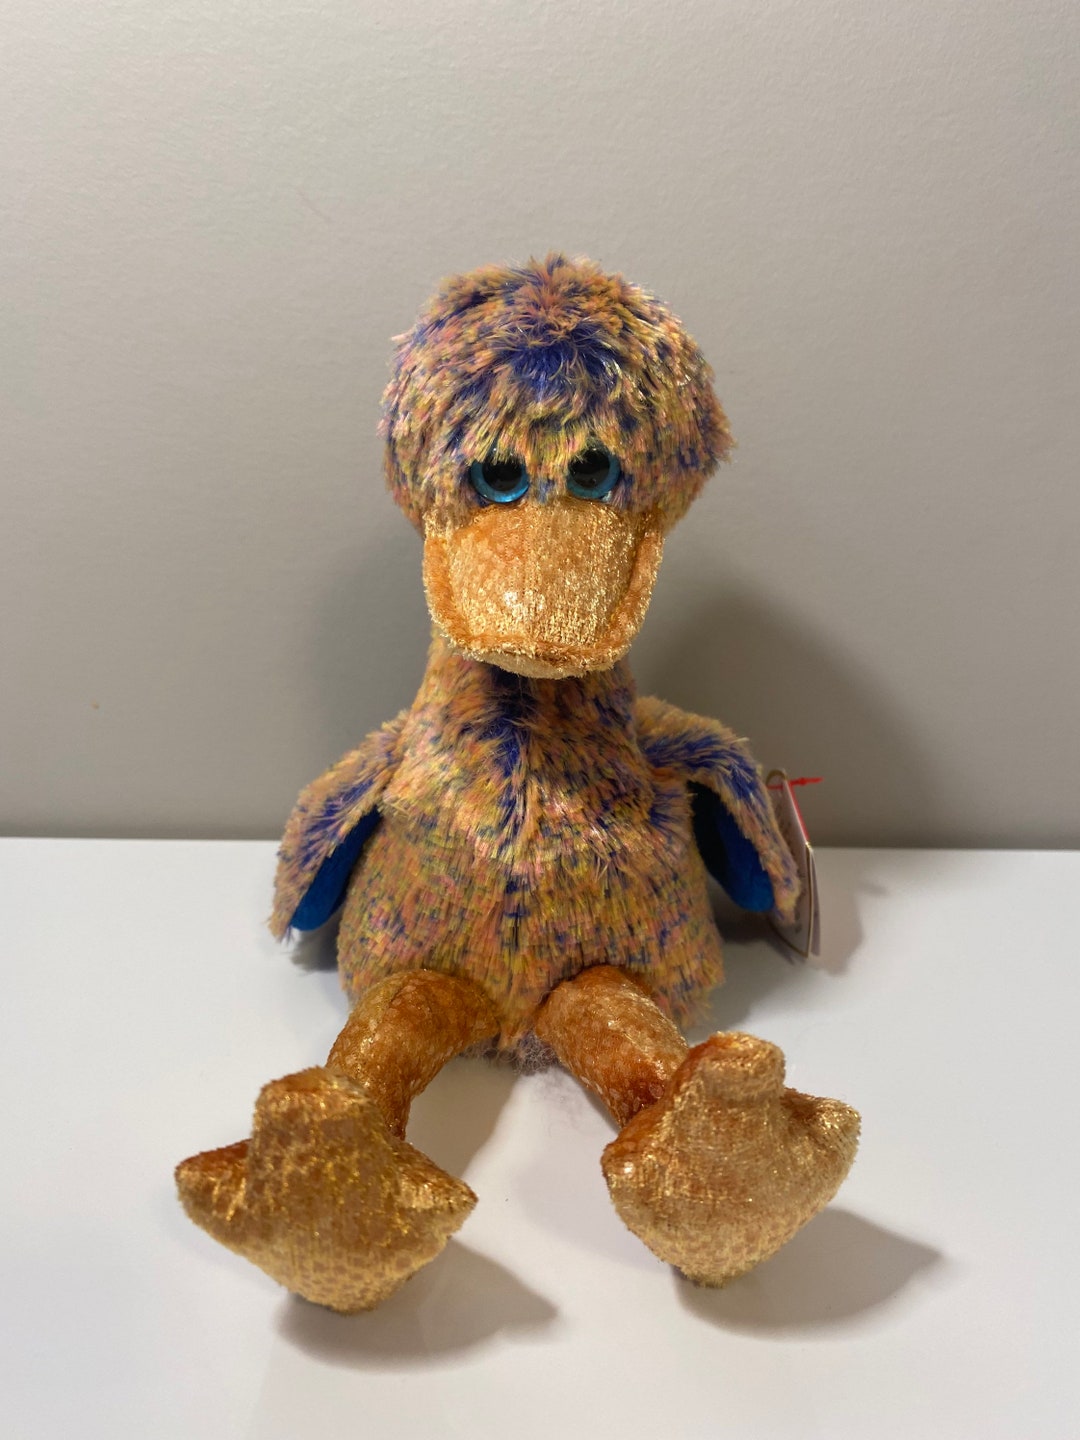 Ty Beanie Baby dinky the Adorable Duck 5.5 Inch photo photo pic